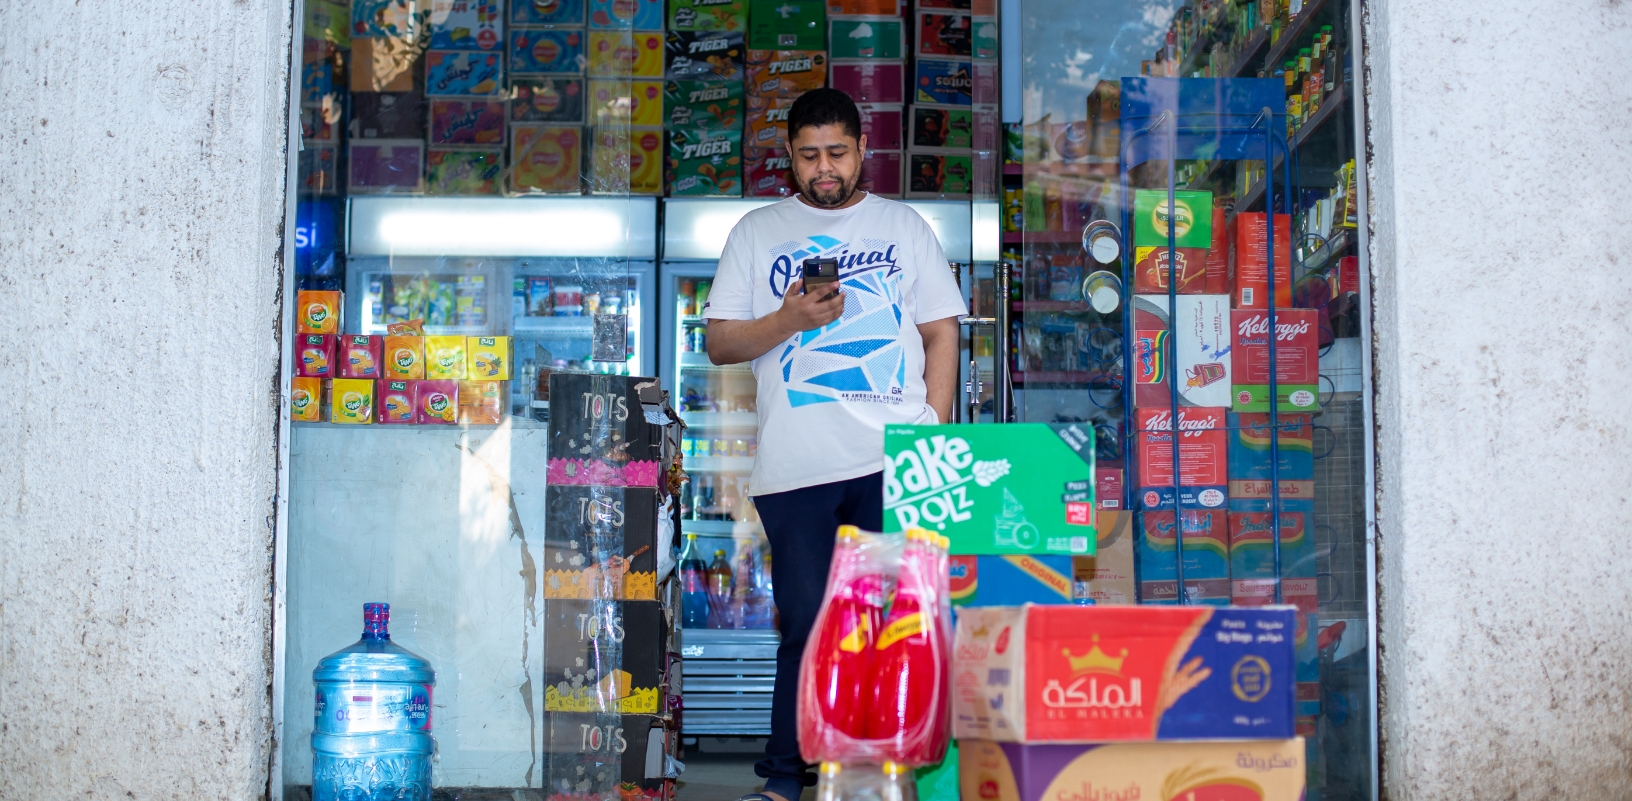 Merchant on phone in front of store